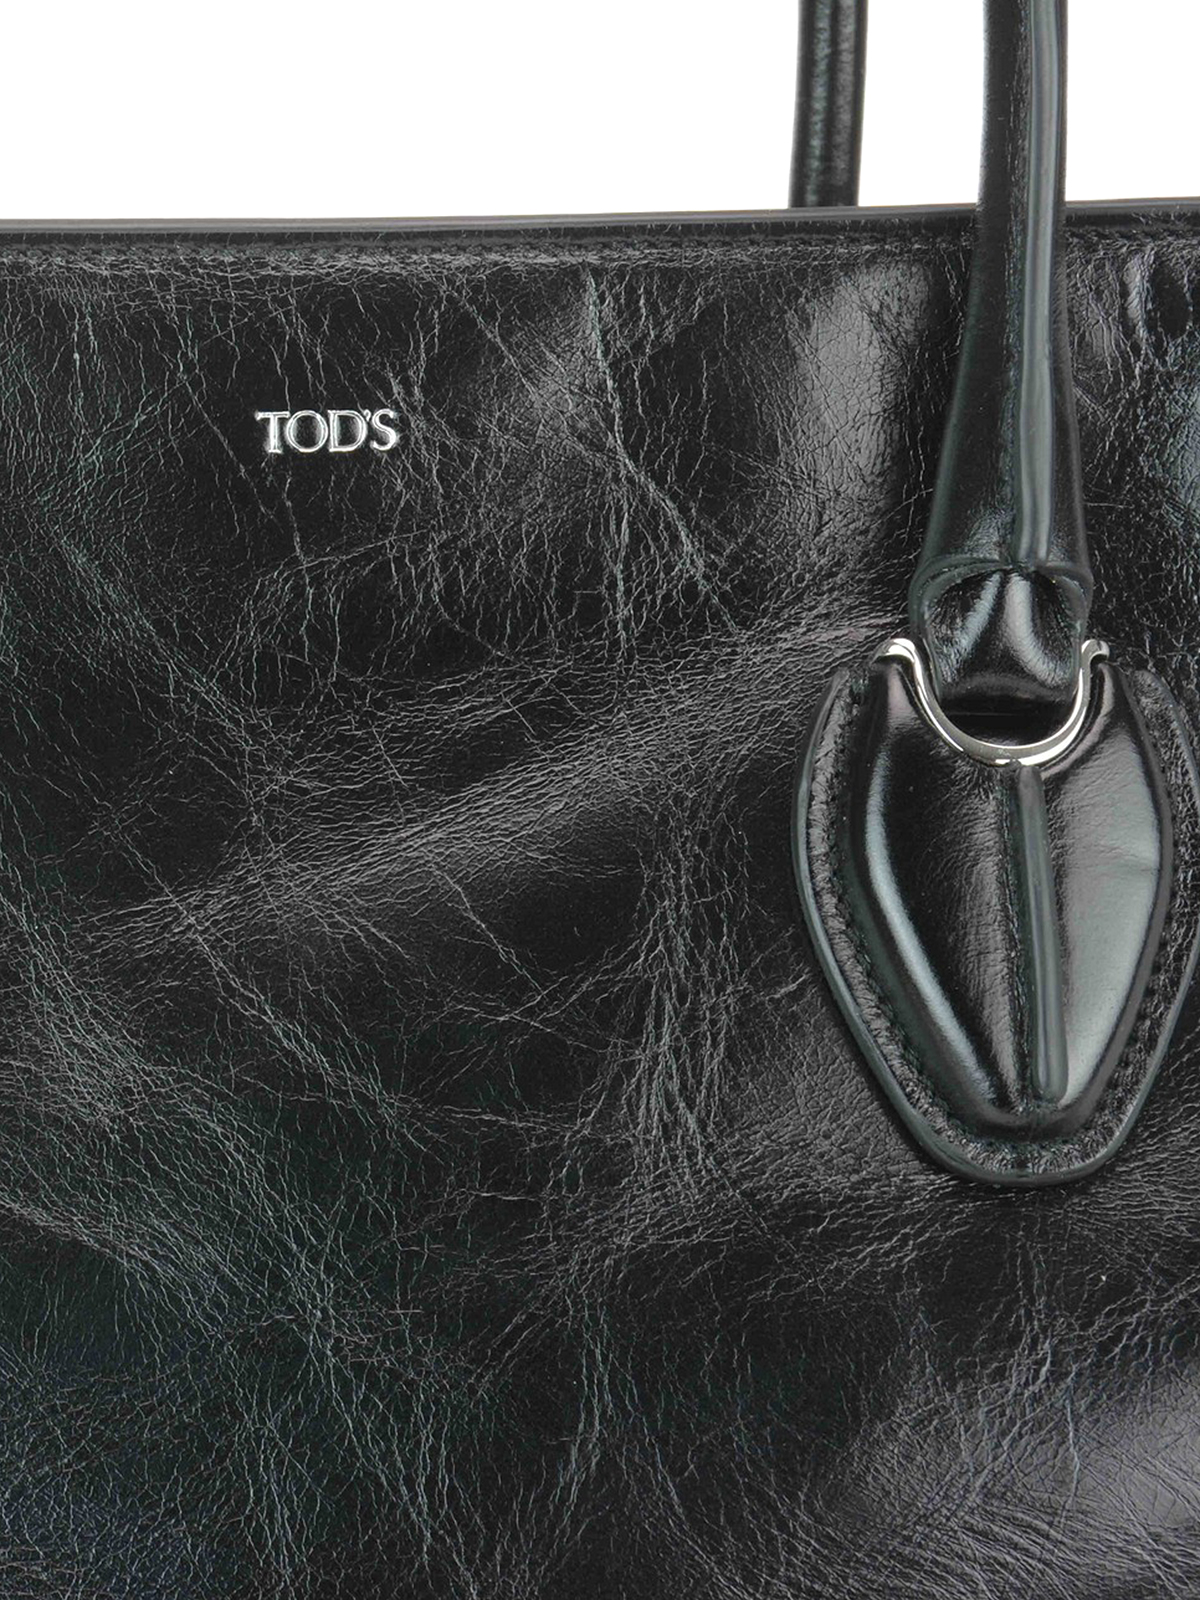 Tod's - Patent Leather Tote Black